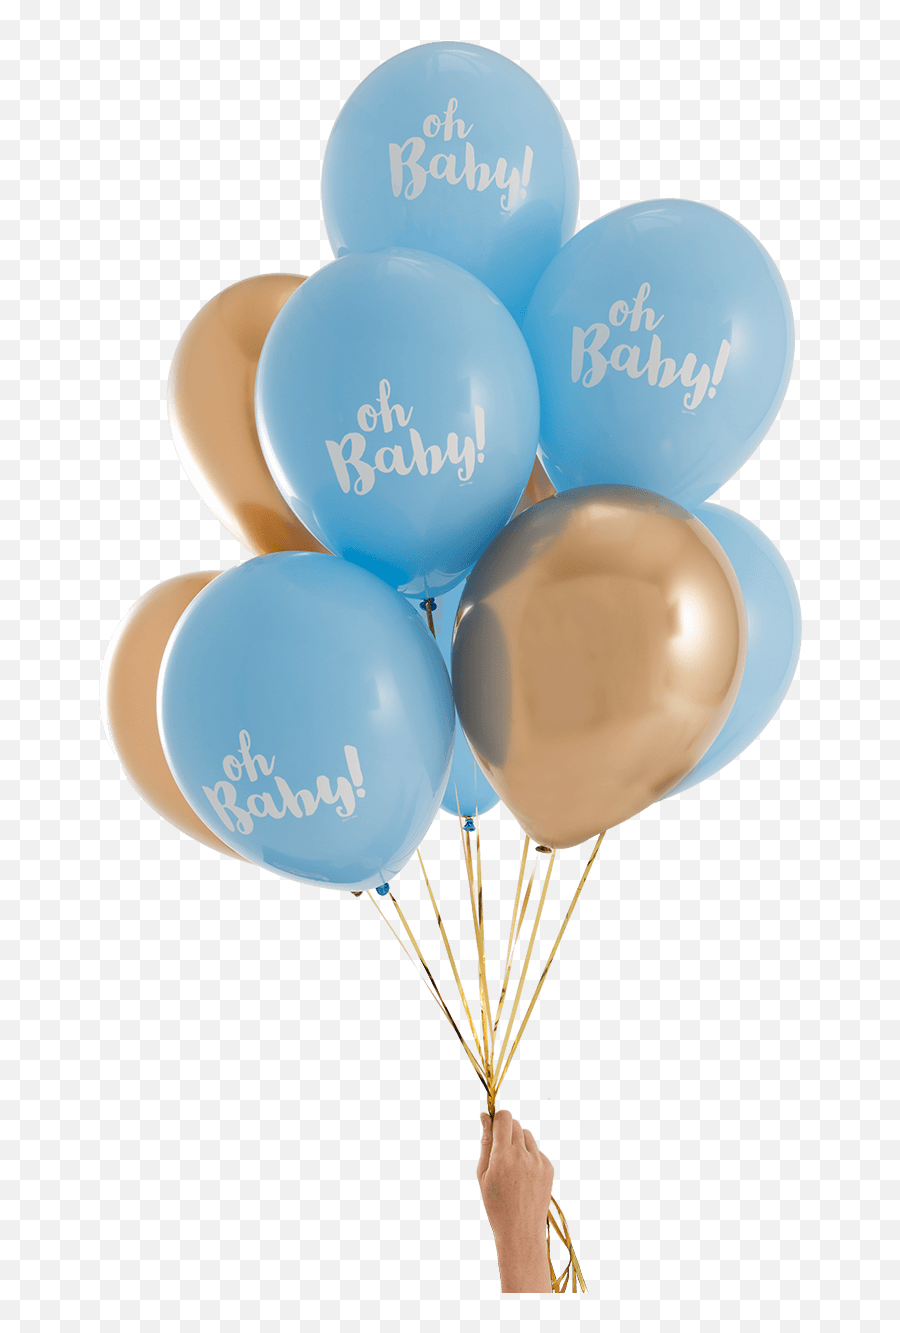 Oh Baby Blue U0026 Gold Party Balloons 14 - Blue And Gold Balloons Png,Balloons Transparent